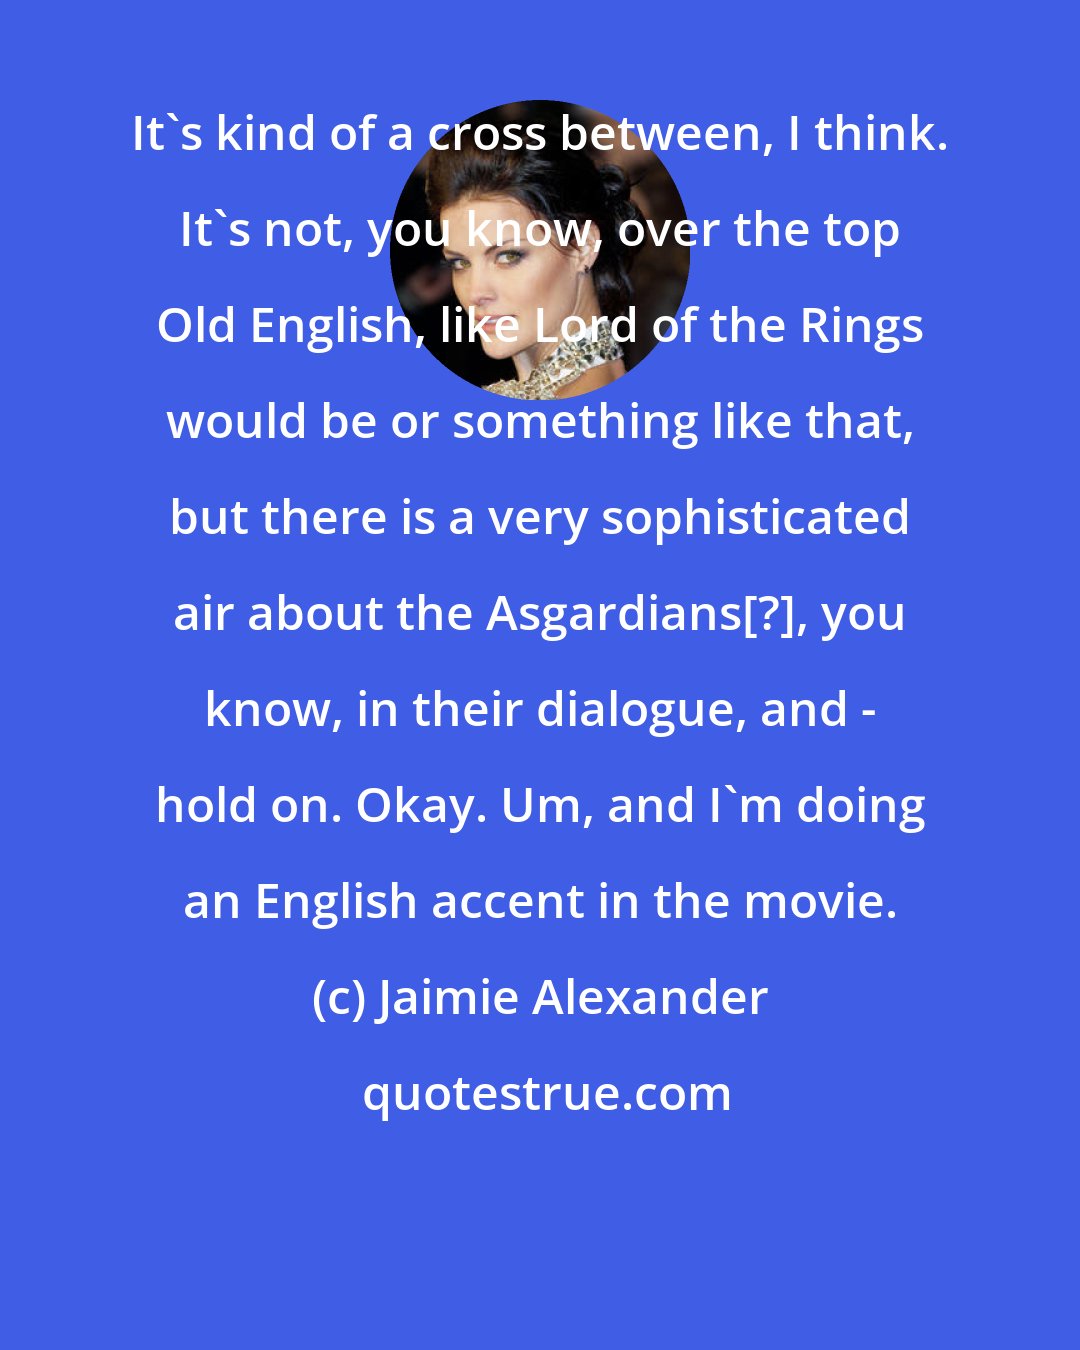 Jaimie Alexander: It's kind of a cross between, I think. It's not, you know, over the top Old English, like Lord of the Rings would be or something like that, but there is a very sophisticated air about the Asgardians[?], you know, in their dialogue, and - hold on. Okay. Um, and I'm doing an English accent in the movie.